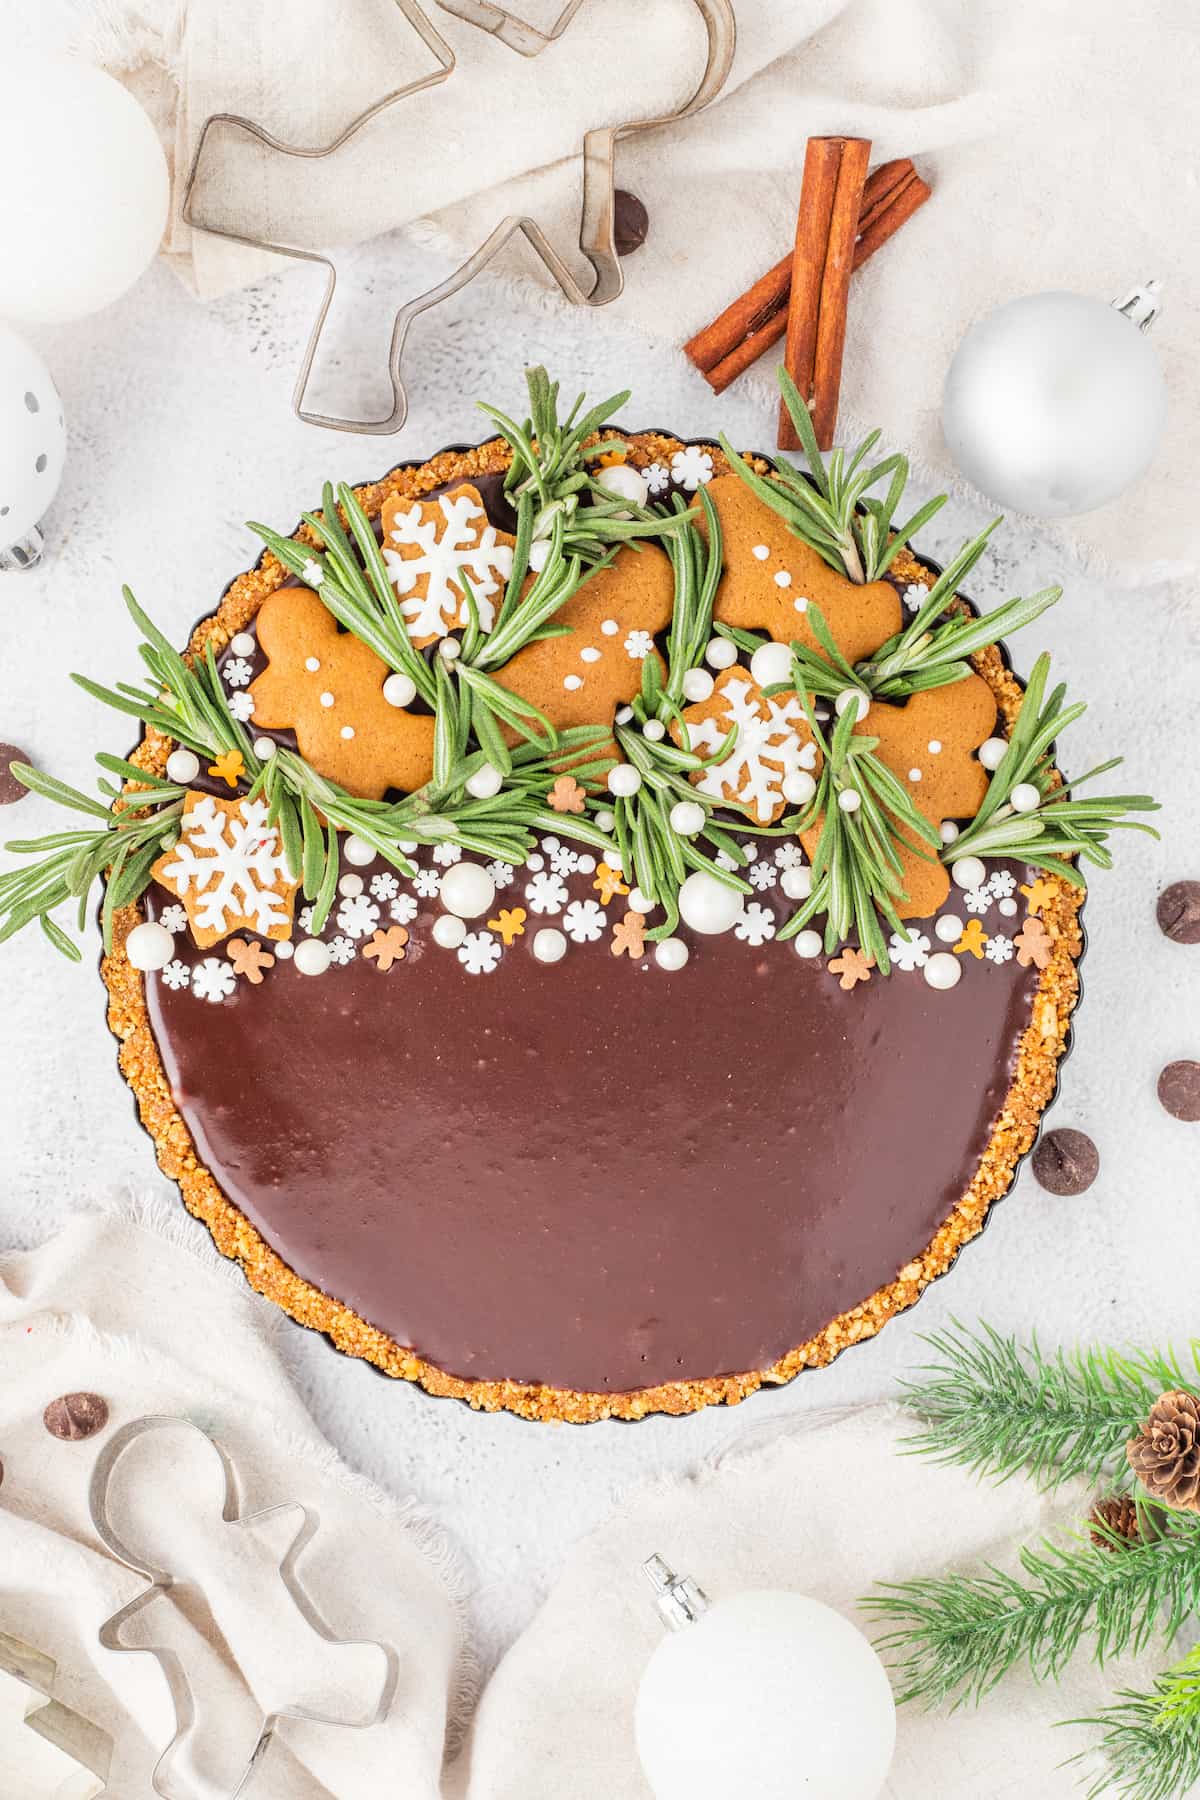 A gingerbread chocolate tart adorned with ornaments.